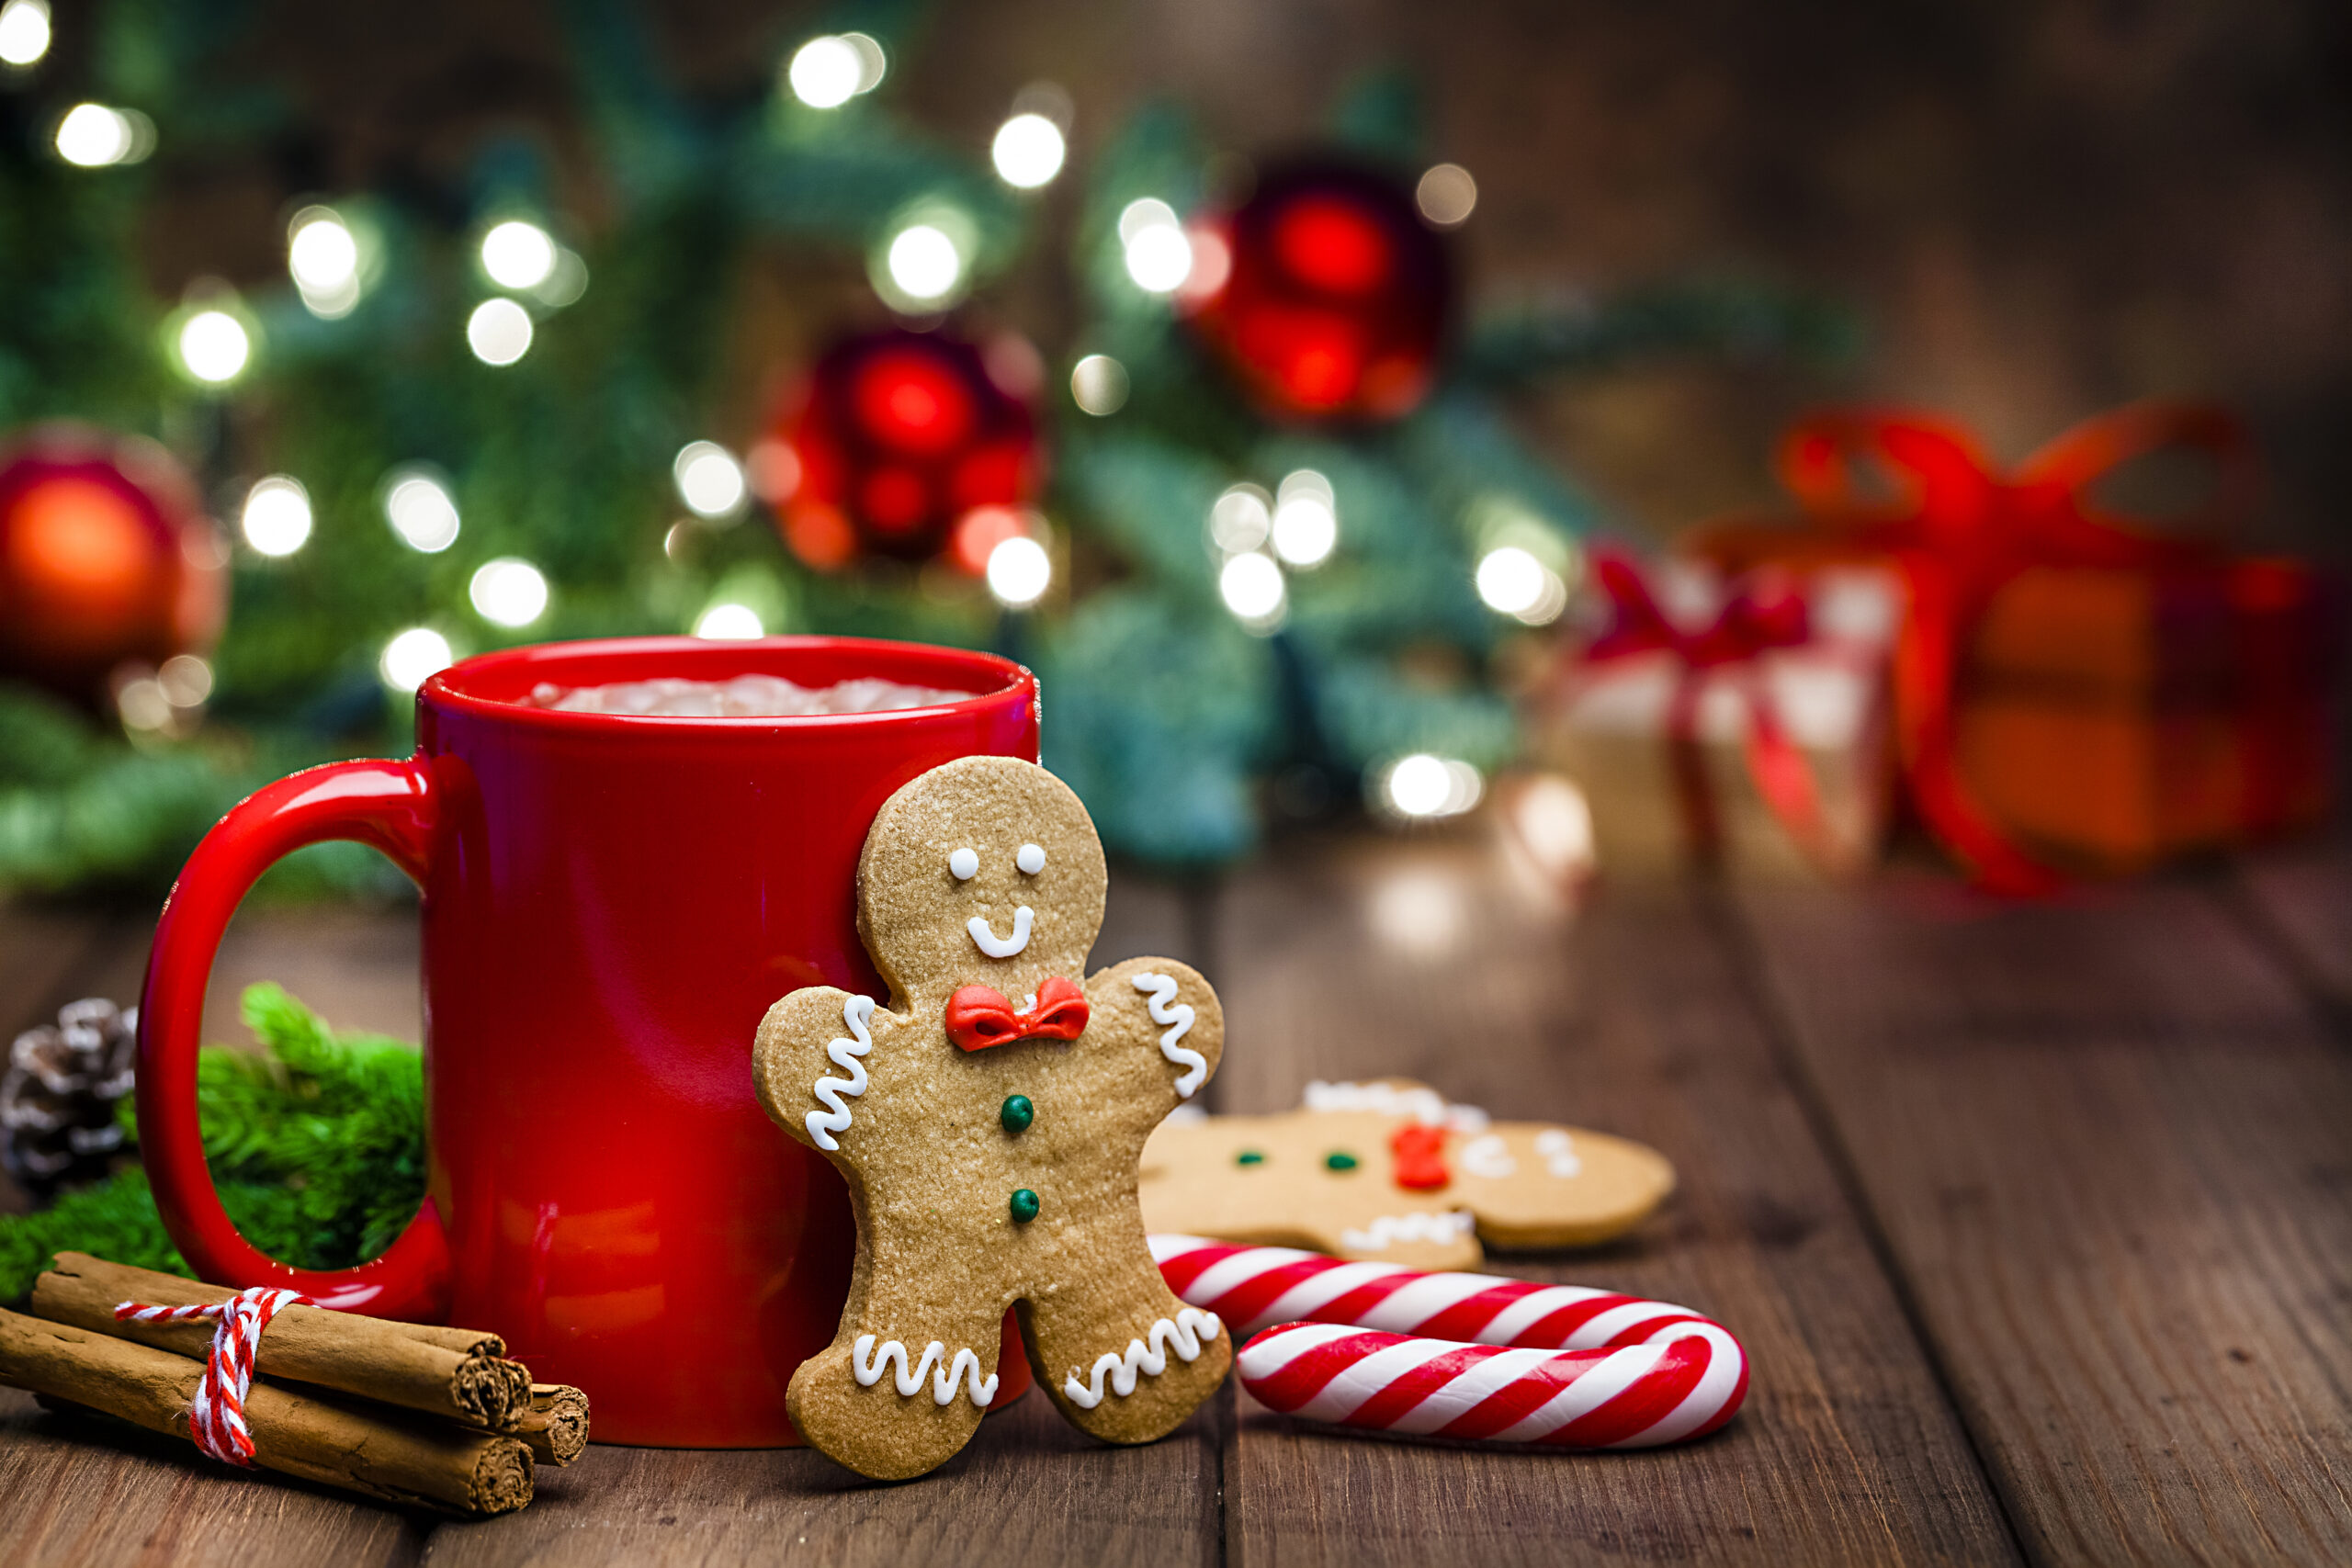 Christmas backgrounds: gingerbread cookies and hot chocolate shot on rustic wooden table. The composition is at the left of an horizontal frame leaving useful copy space for text and/or logo at the right. Christmas tree and string lights are out of focus at background.  Predominant colors are red, green and brown.